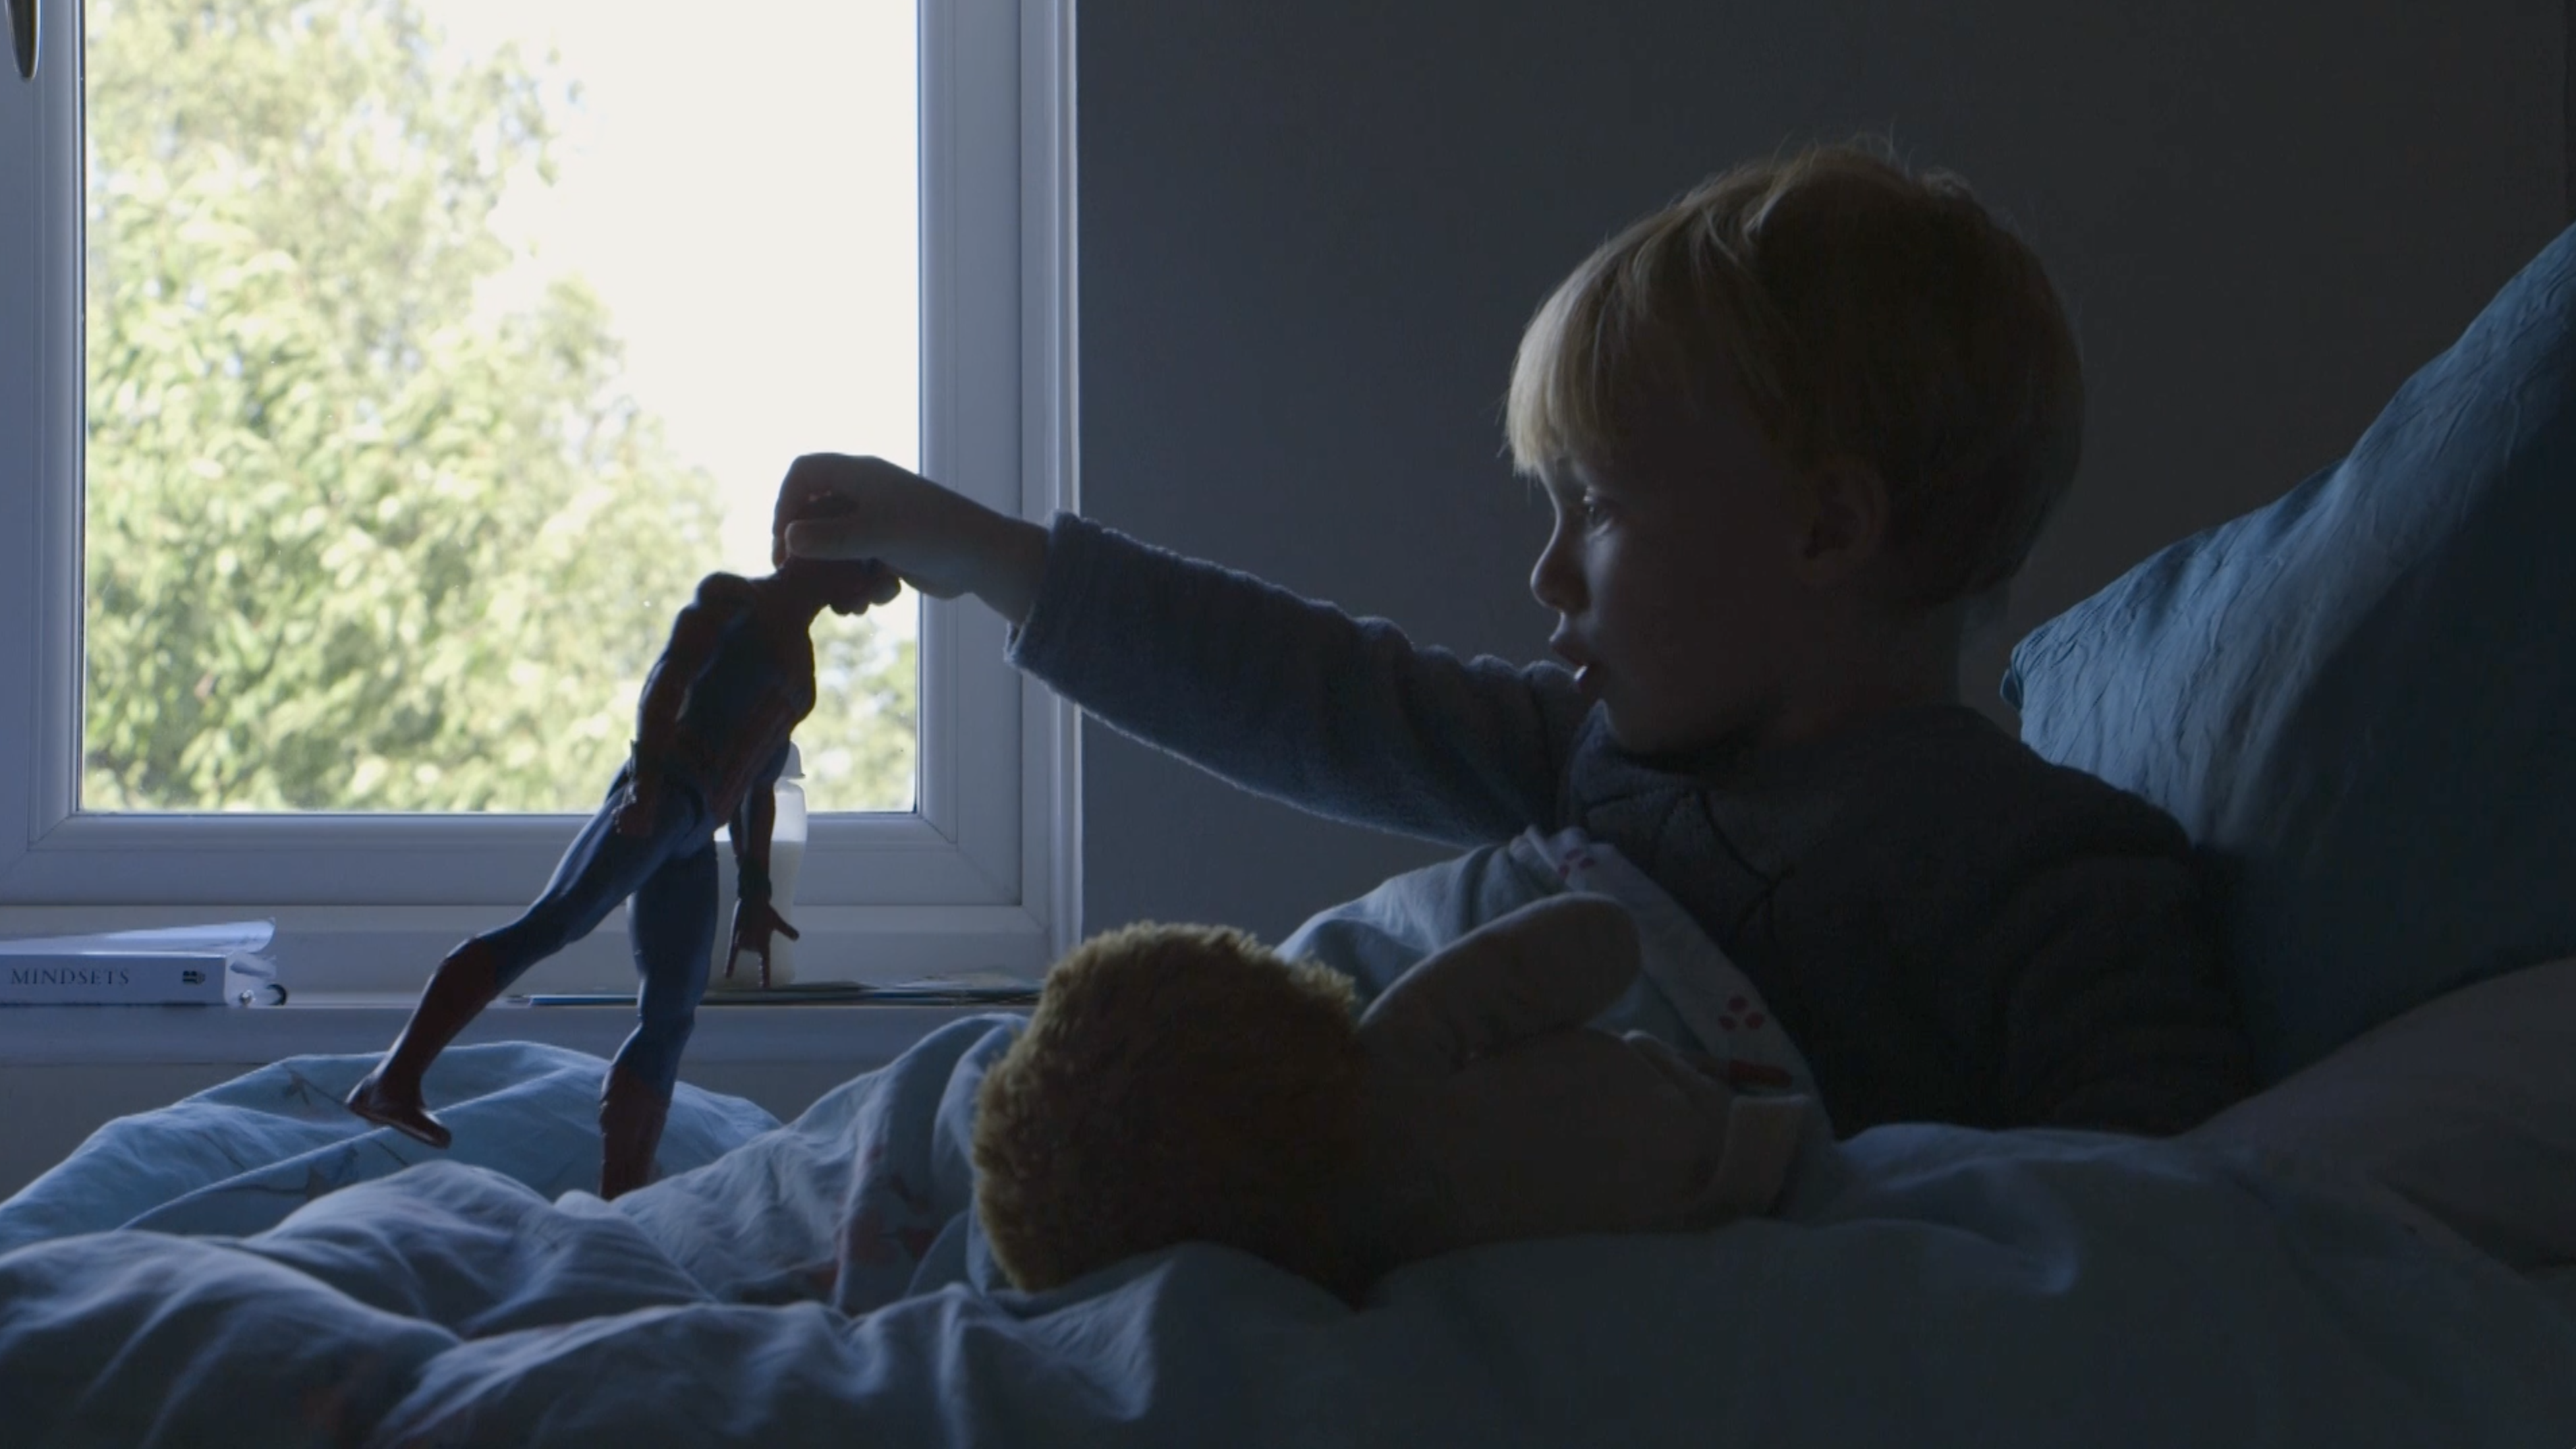 Screen capture of a Shelter video, showing a young boy in bed with a toy.